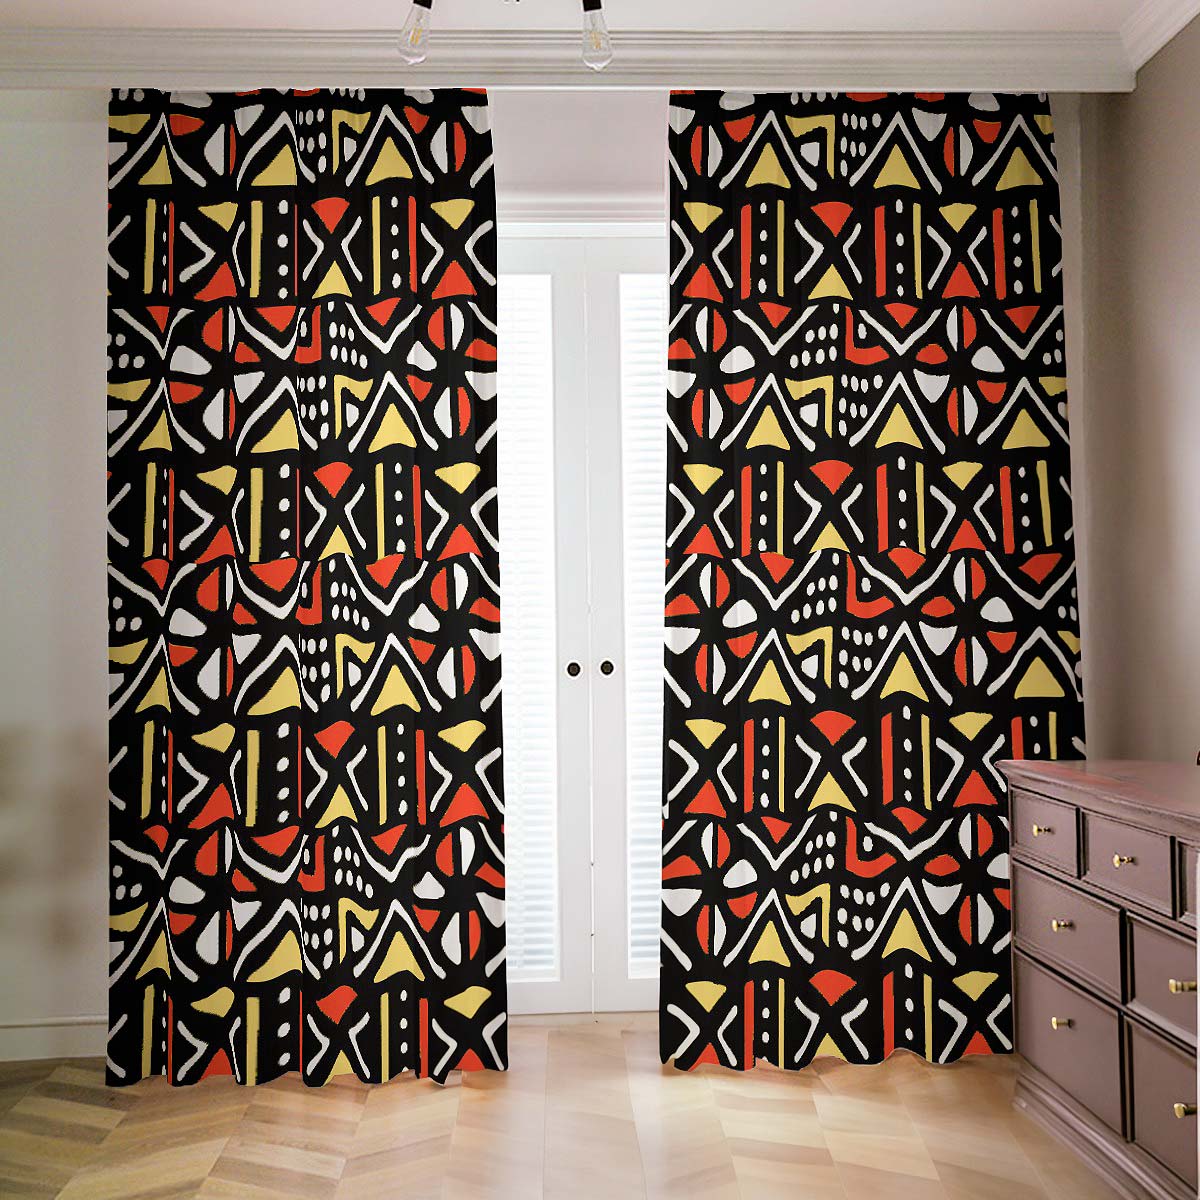 Tribal Curtain Blackout in African Mudcloth Print - Bynelo